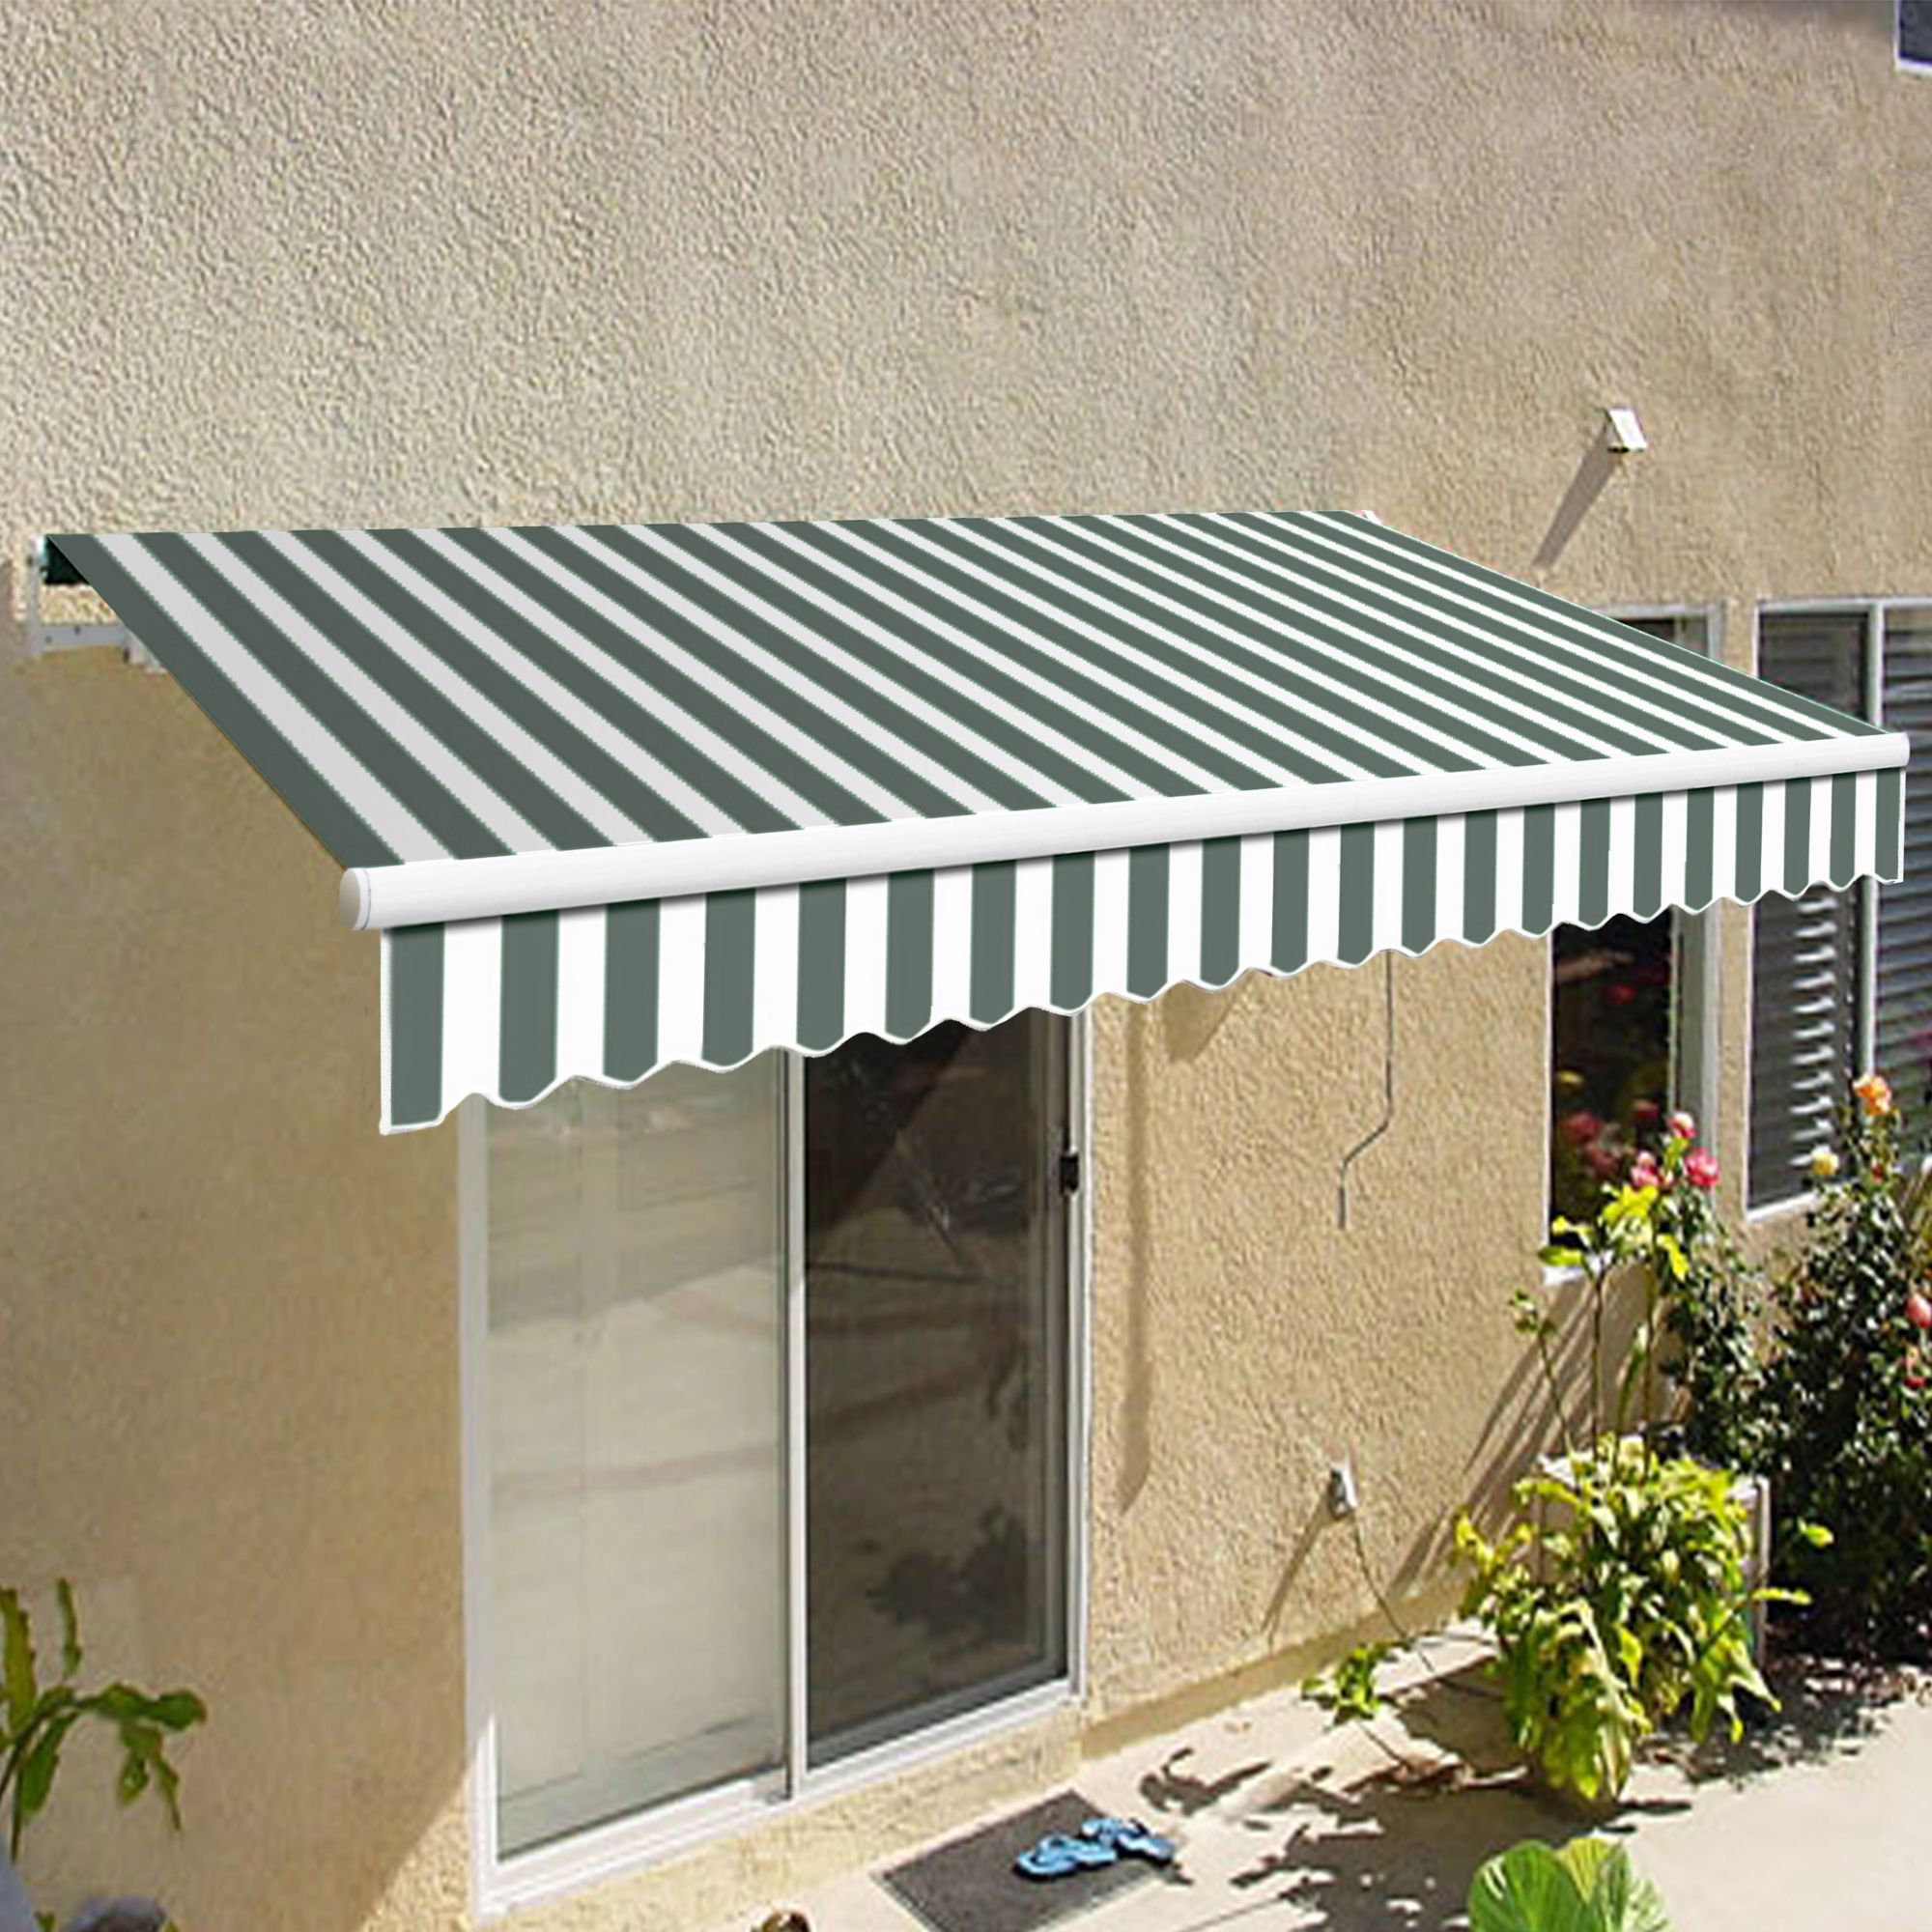 Awntech California 12' Beauty-Mark Manual Patio Awning with 120&quot; Projection - Gray